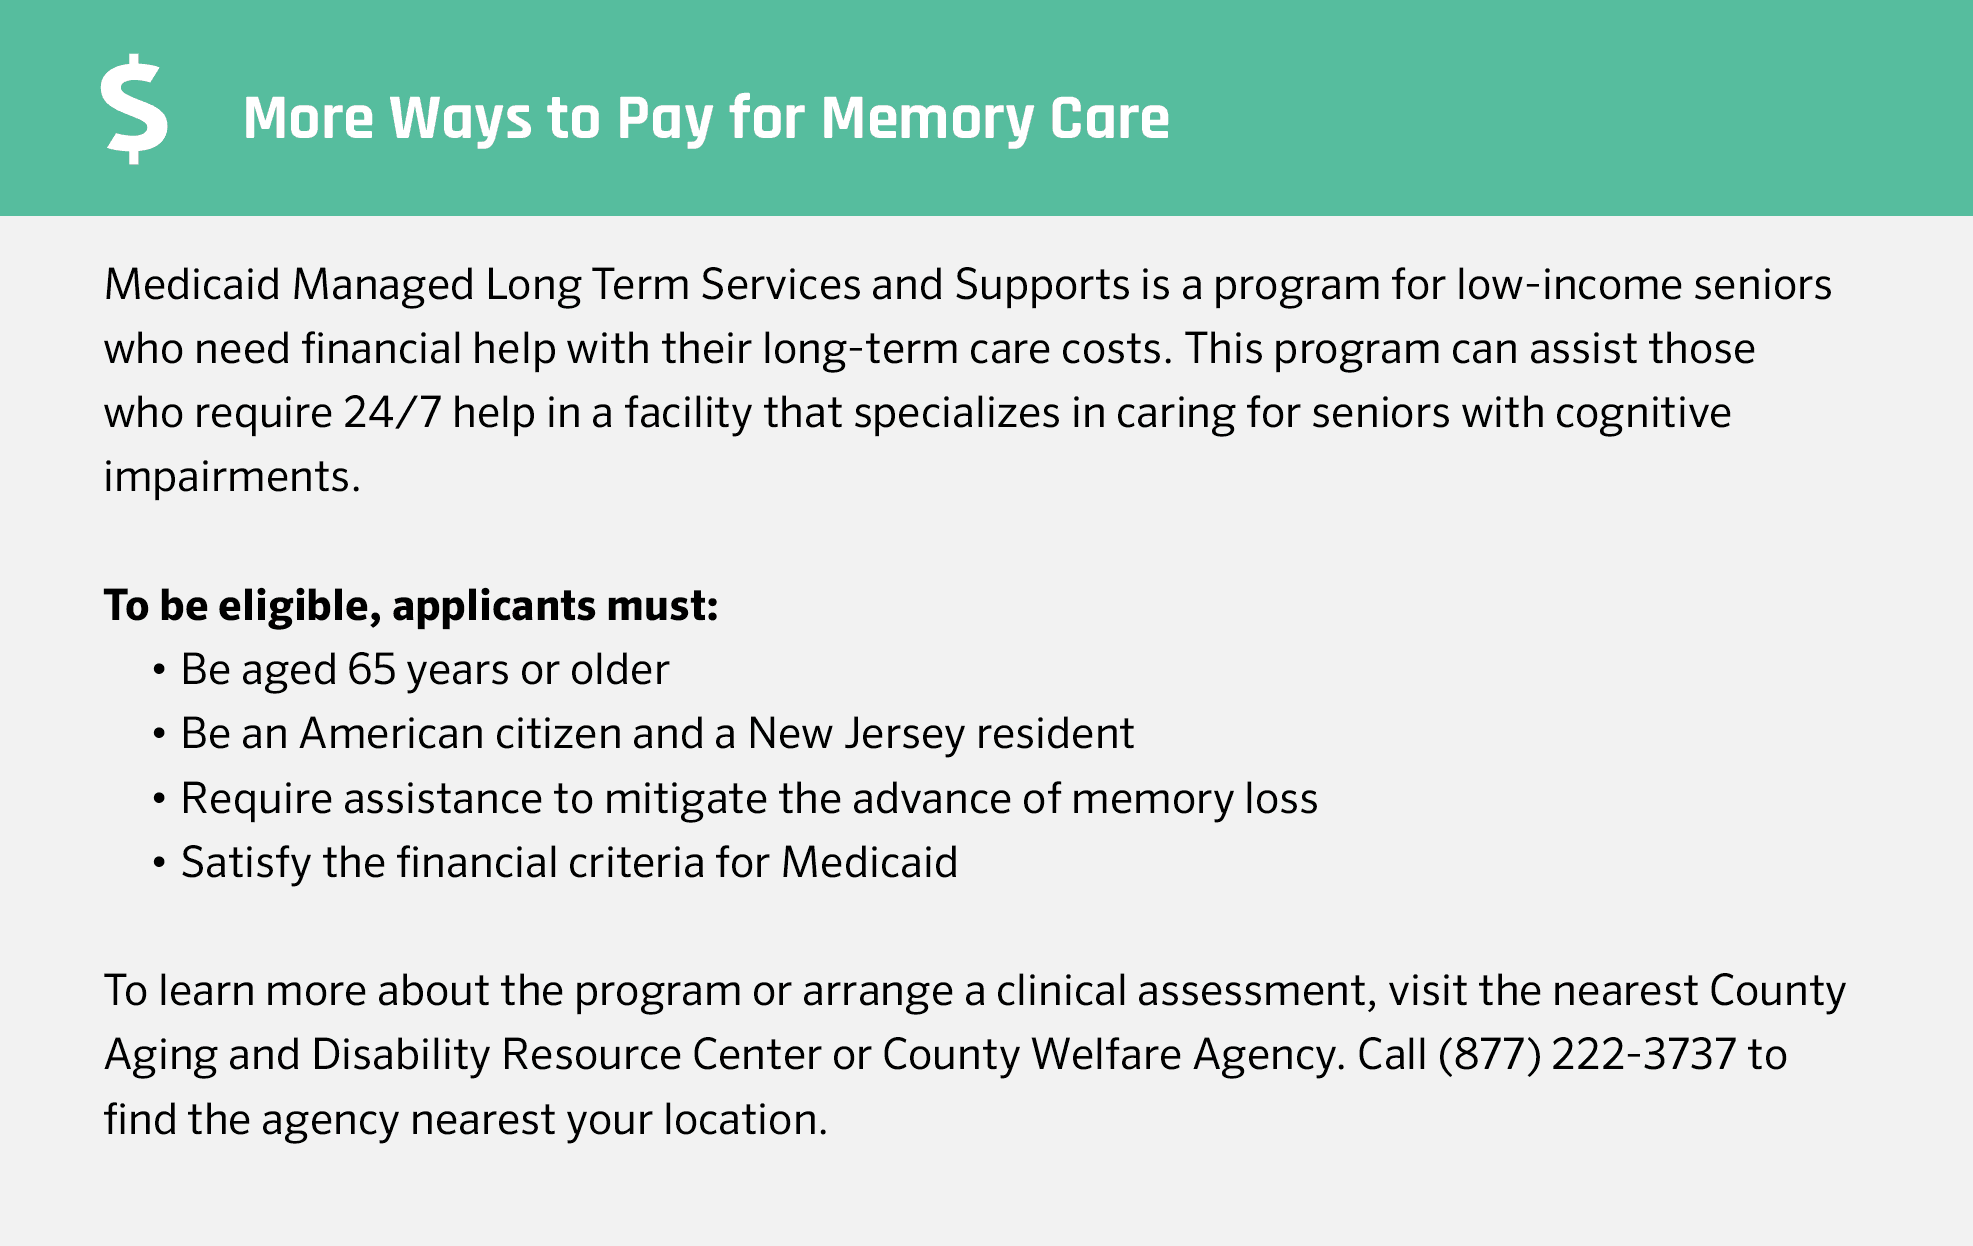 Financial Assistance for Memory Care in New Jersey